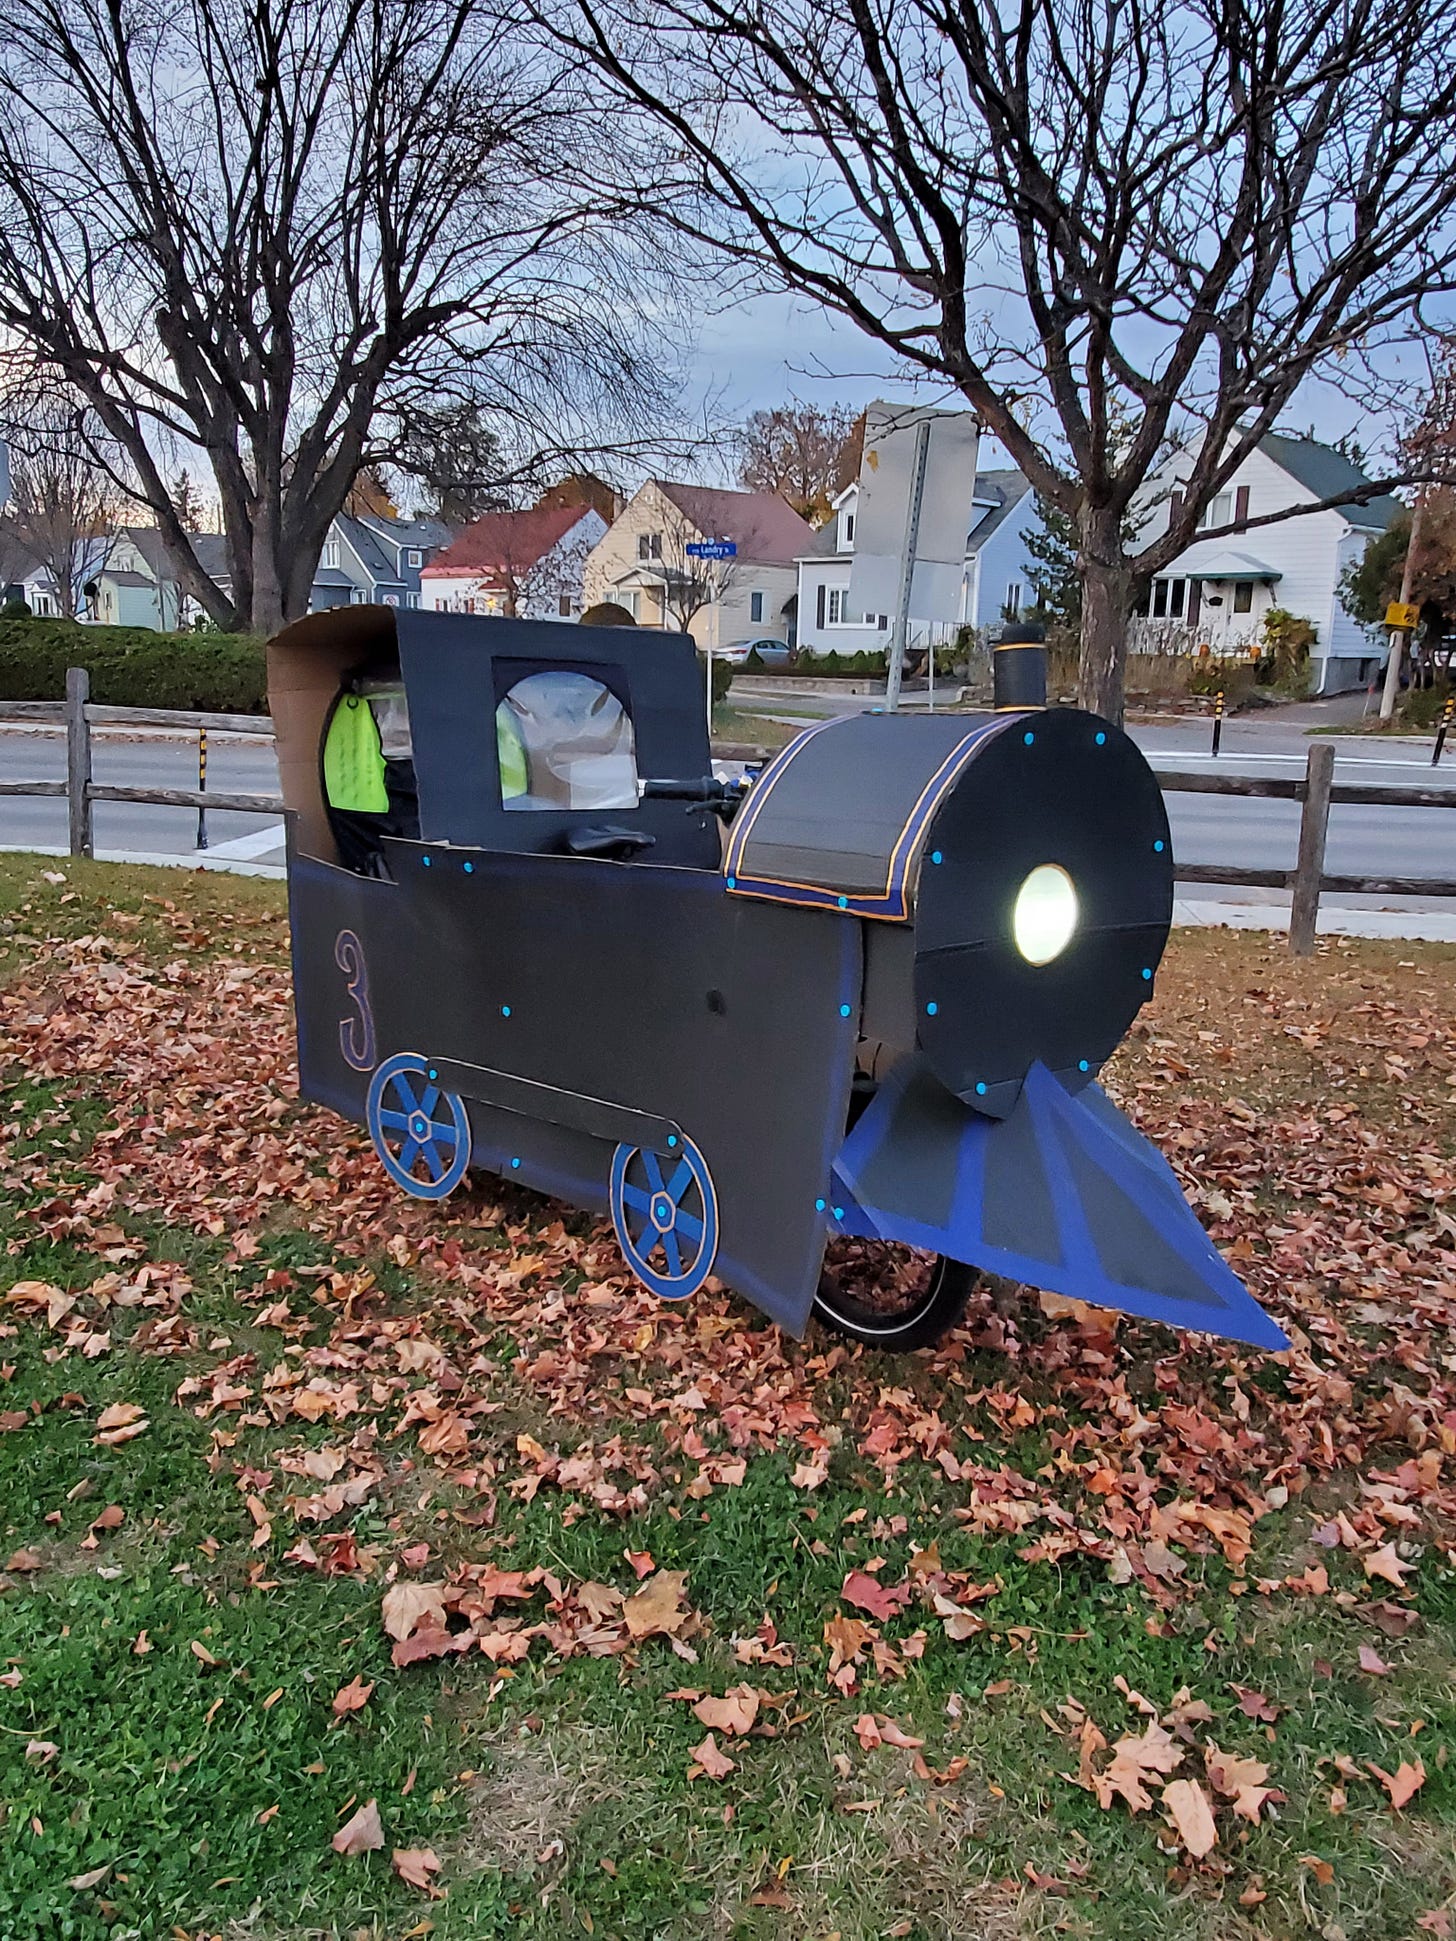 A photo of a Tern GSD e-cargo bike with a cardboard train costume exterior. The train cabin covers the rider seat in the back, and the headlight comes out a barrel on the front.